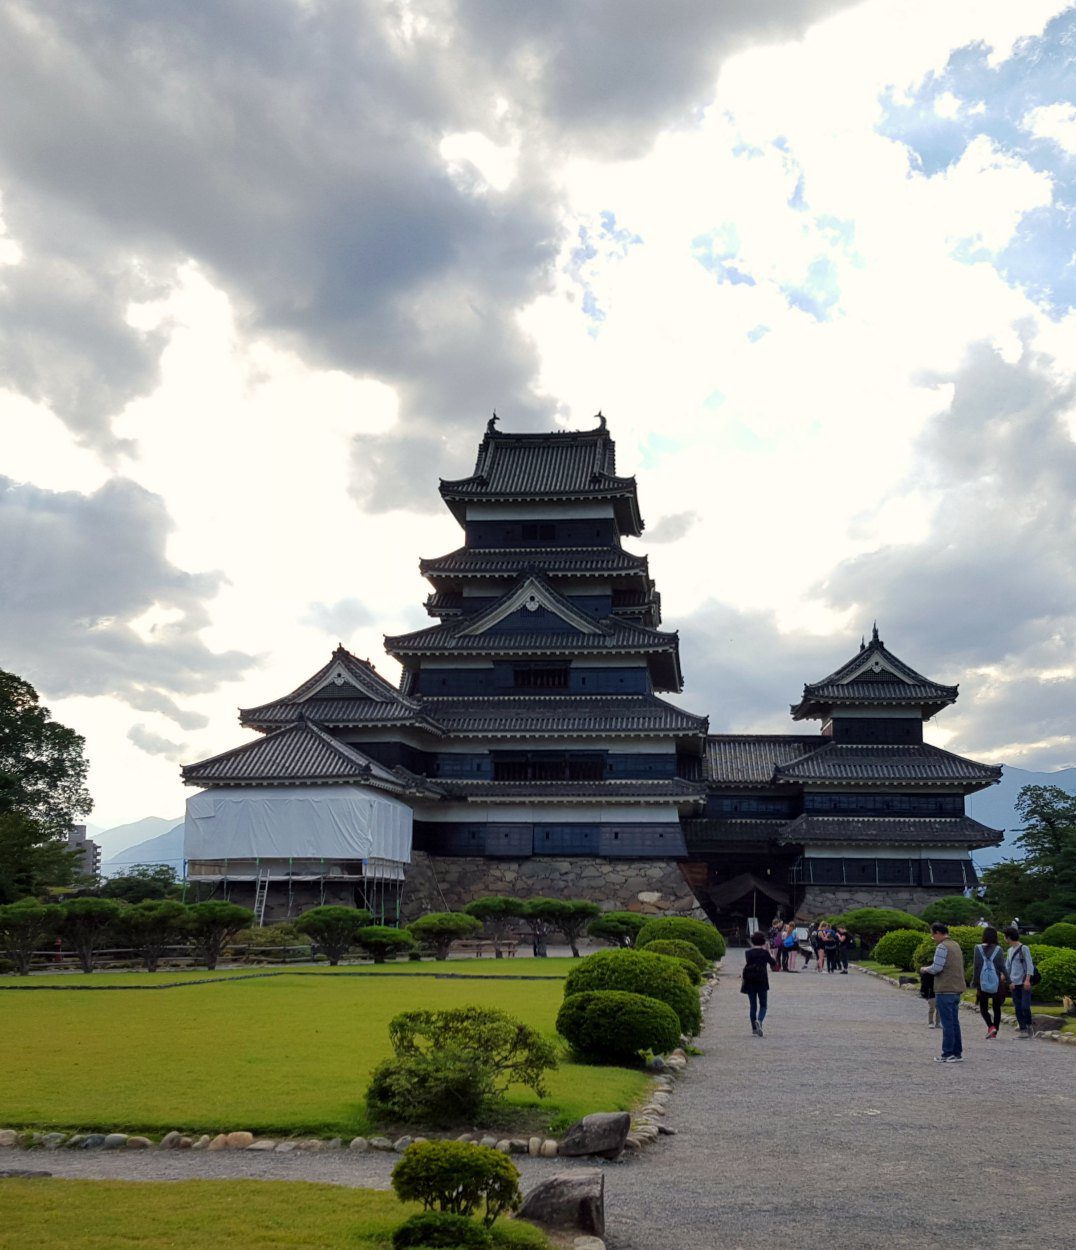 Another View of Matsumoto Castle, Japan